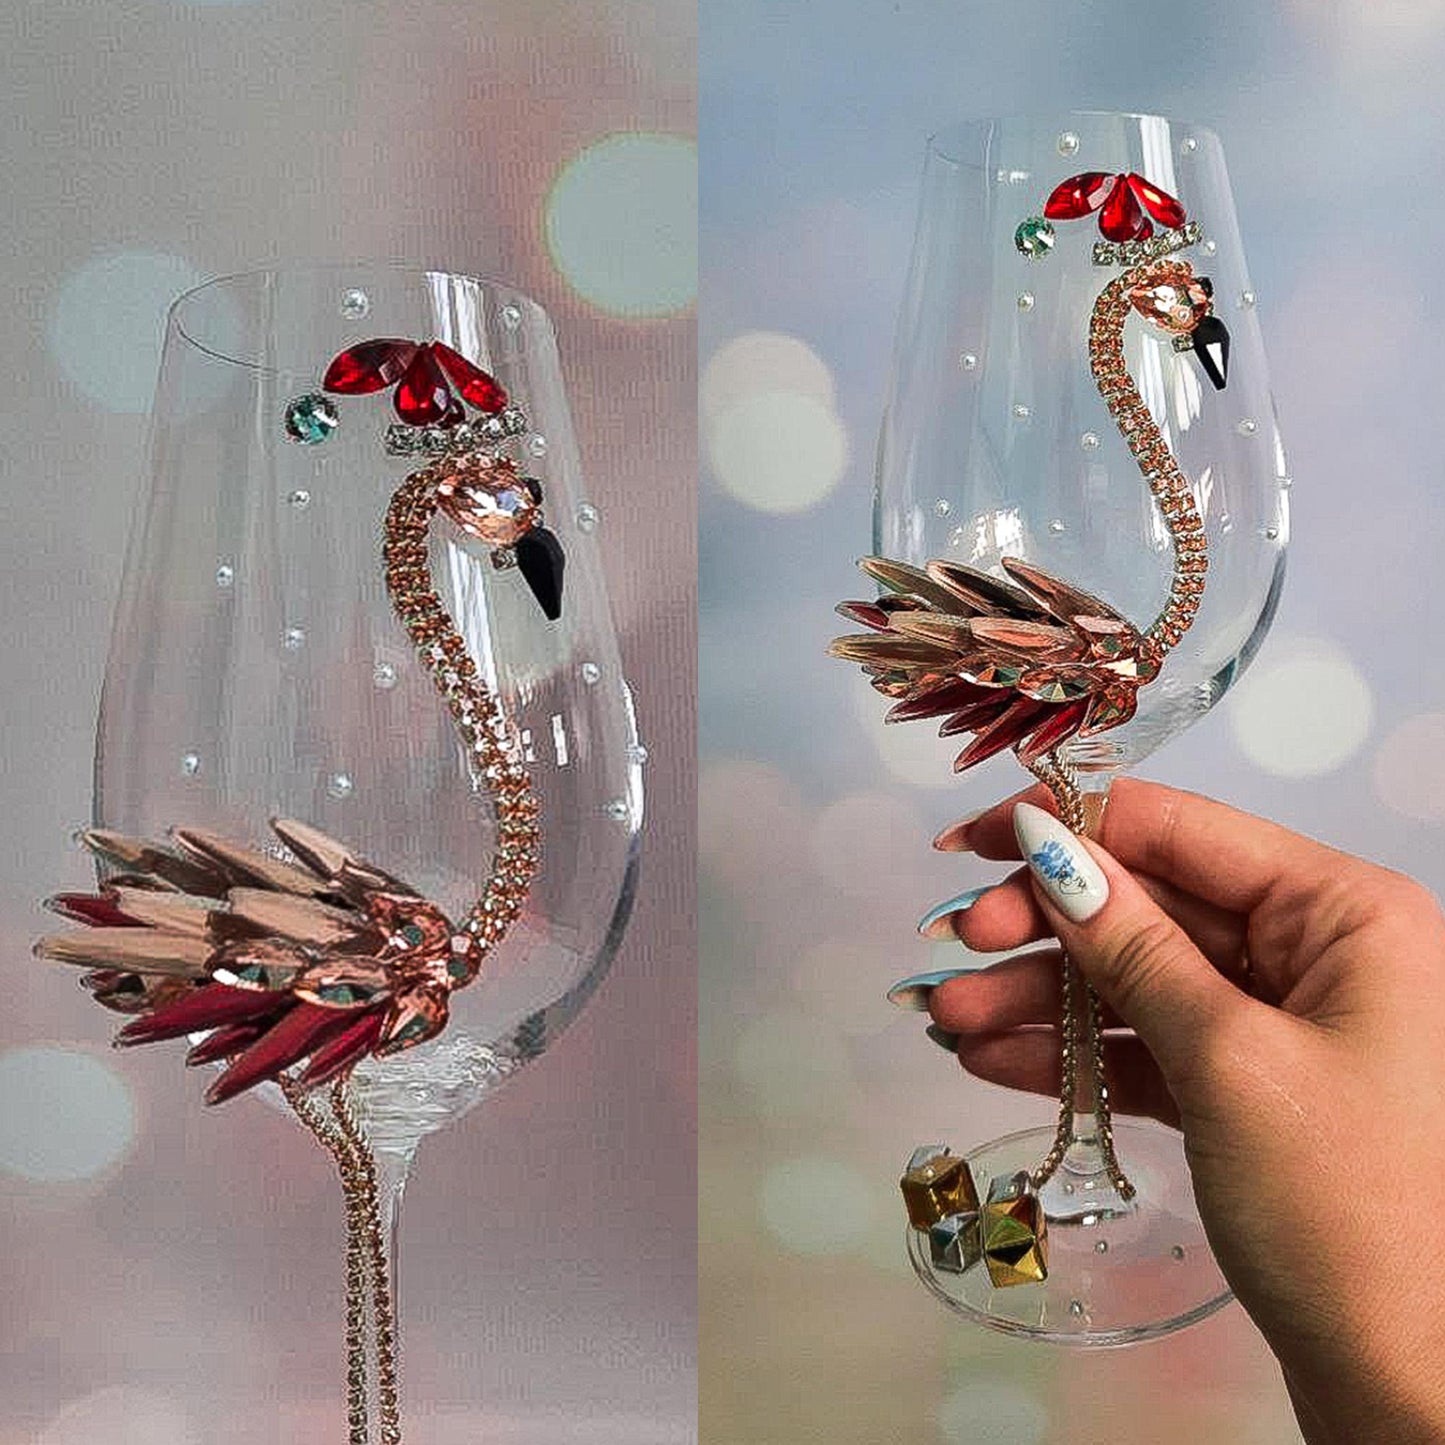 Wreathed Flamingo Elegance Wine or Champagne Glass